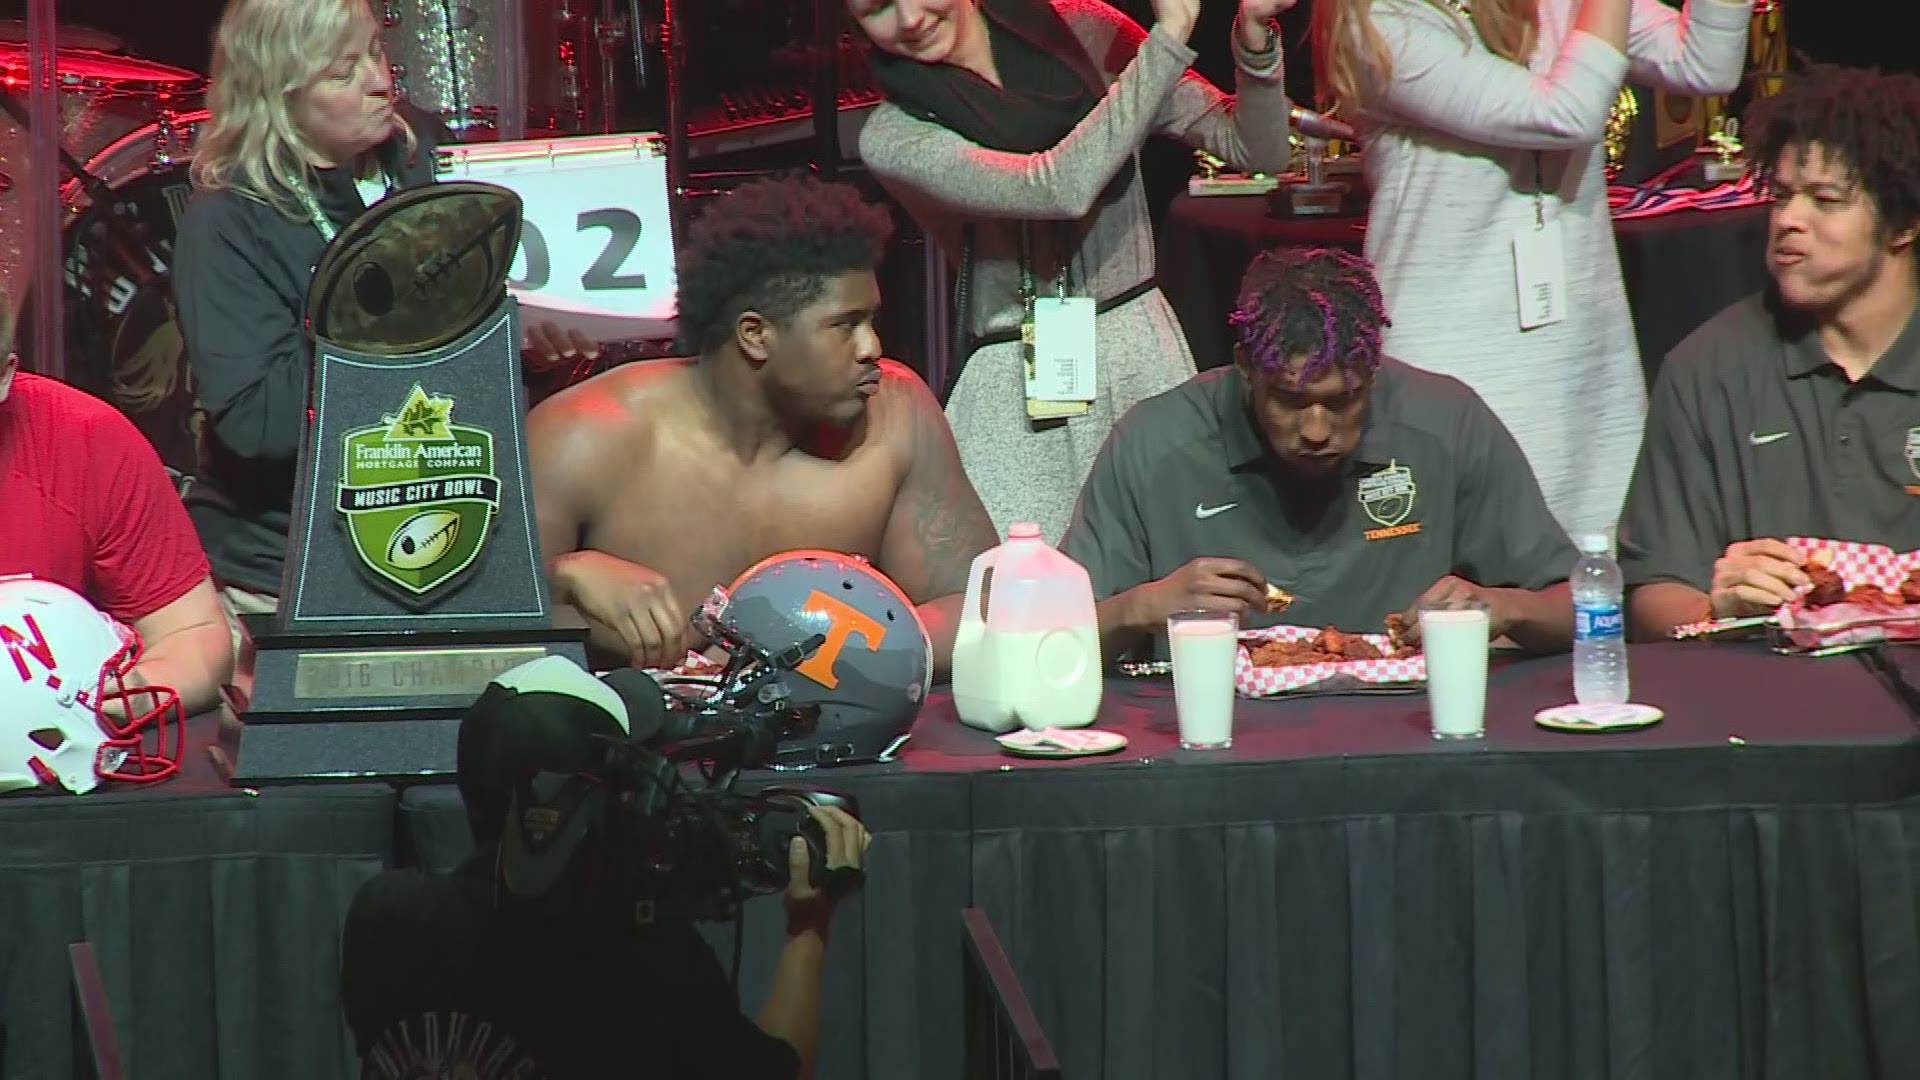 Charles Mosley put away 11 Hattie B's hot chicken tenders but Garrett Johns and Nebraska topped the Vols in the eating competition at the Music City Bowl Welcome Party.